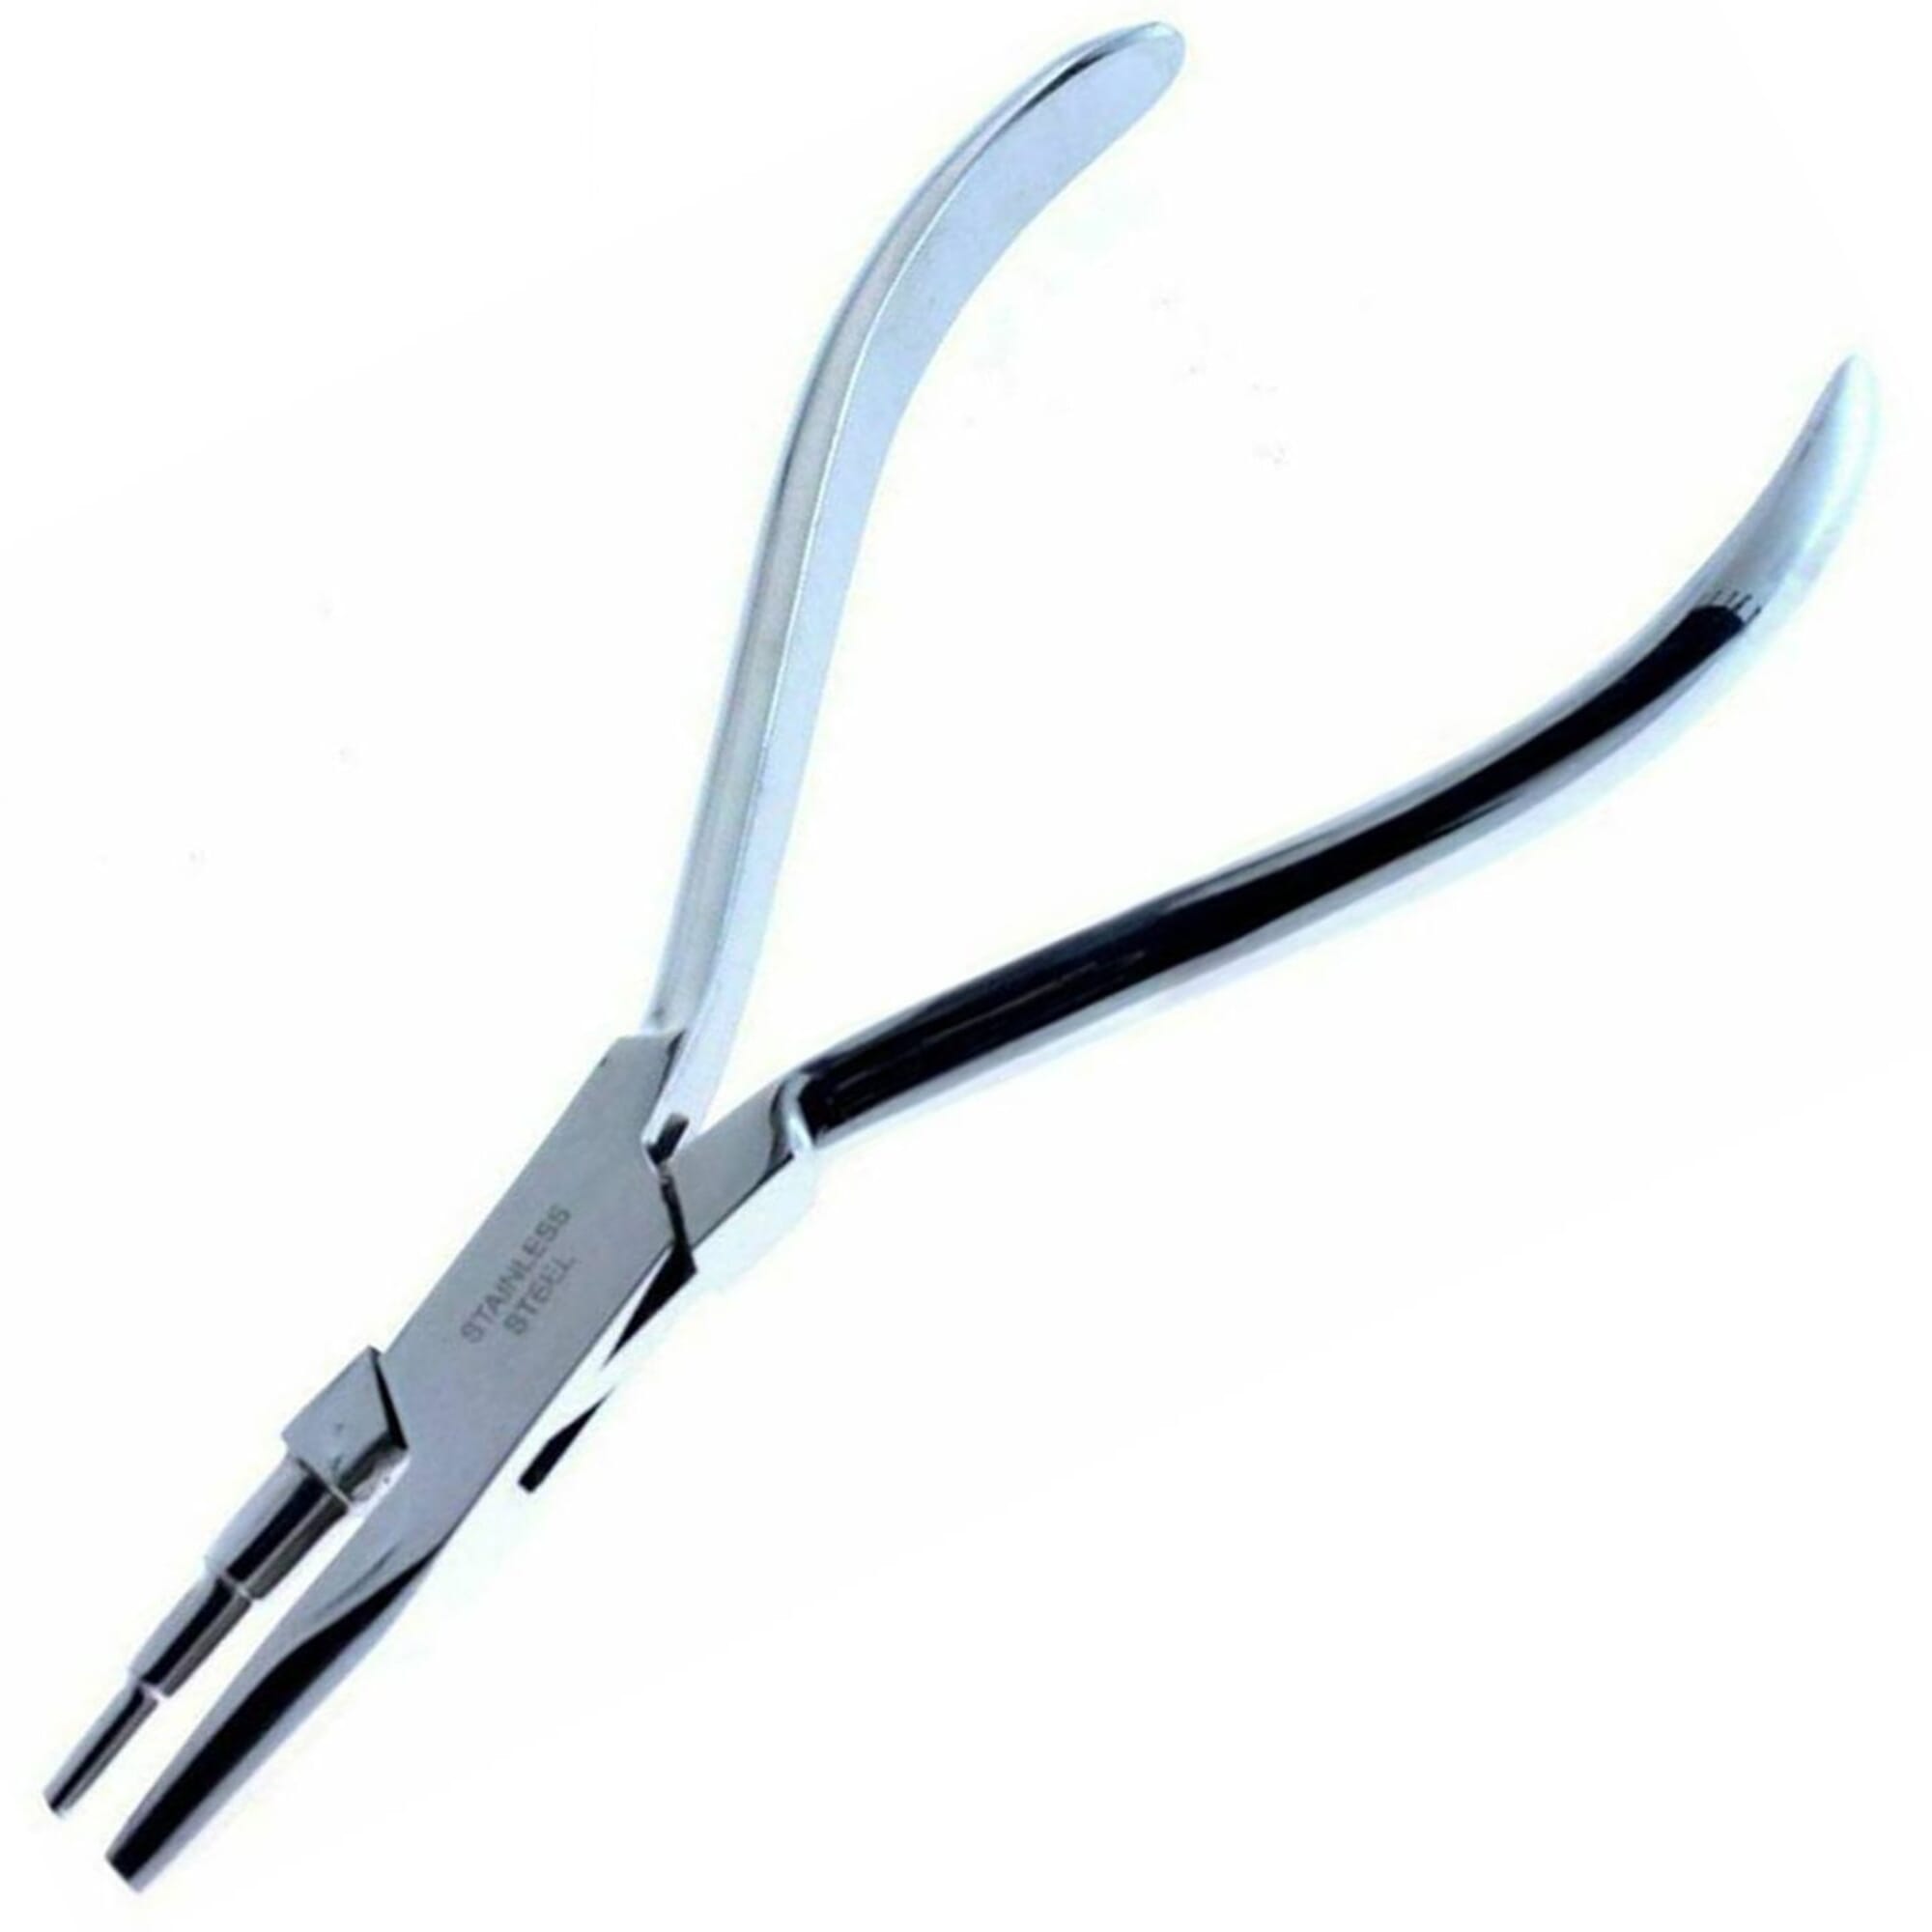 Pliers for Jewelry Making. Comes in individual pieces or Set of 4